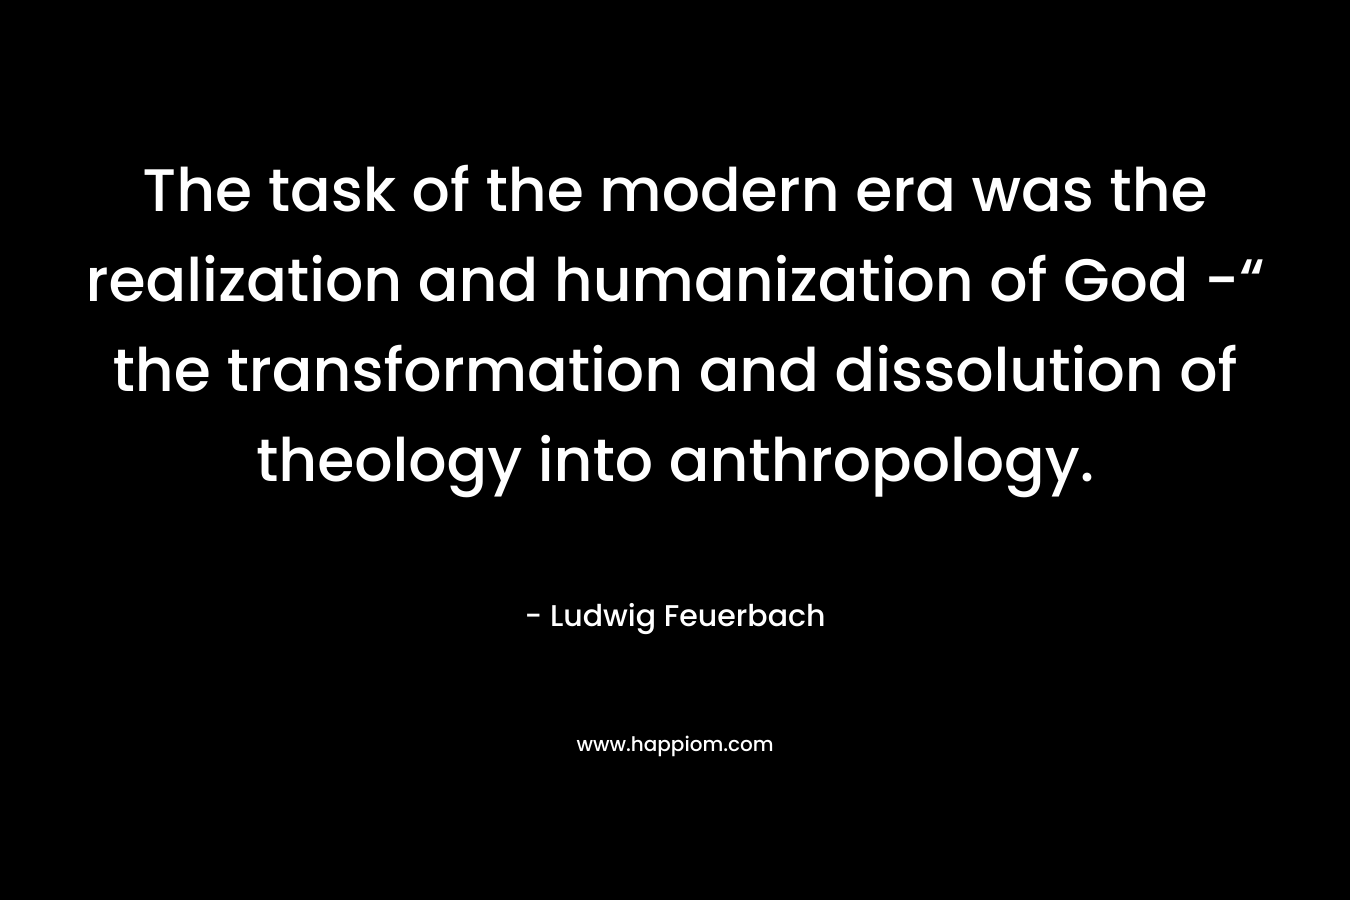 The task of the modern era was the realization and humanization of God -“ the transformation and dissolution of theology into anthropology.